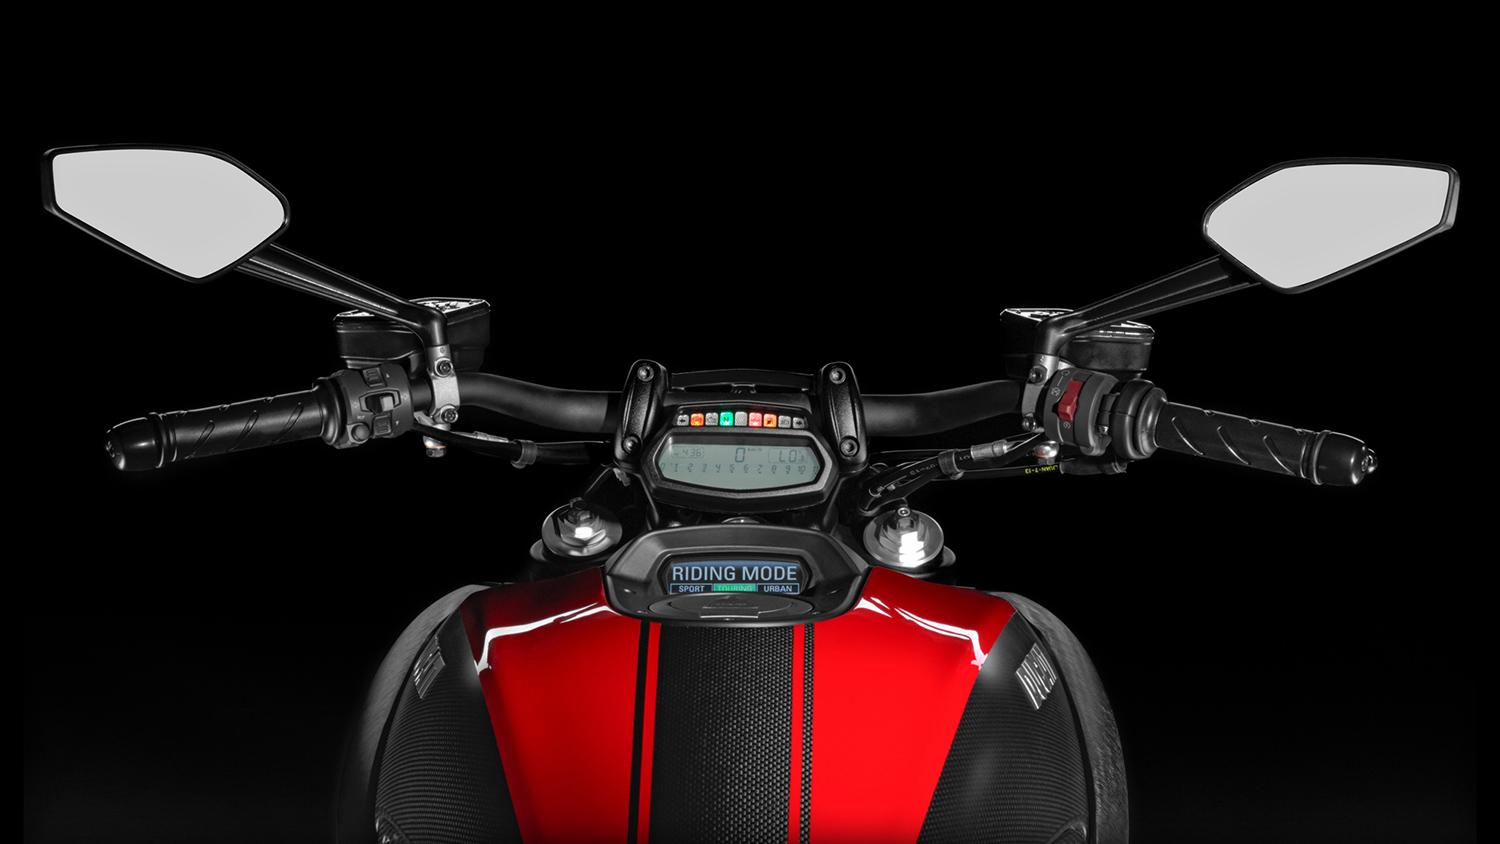 Ducati-Diavel-Carbon-red-instrument-panel